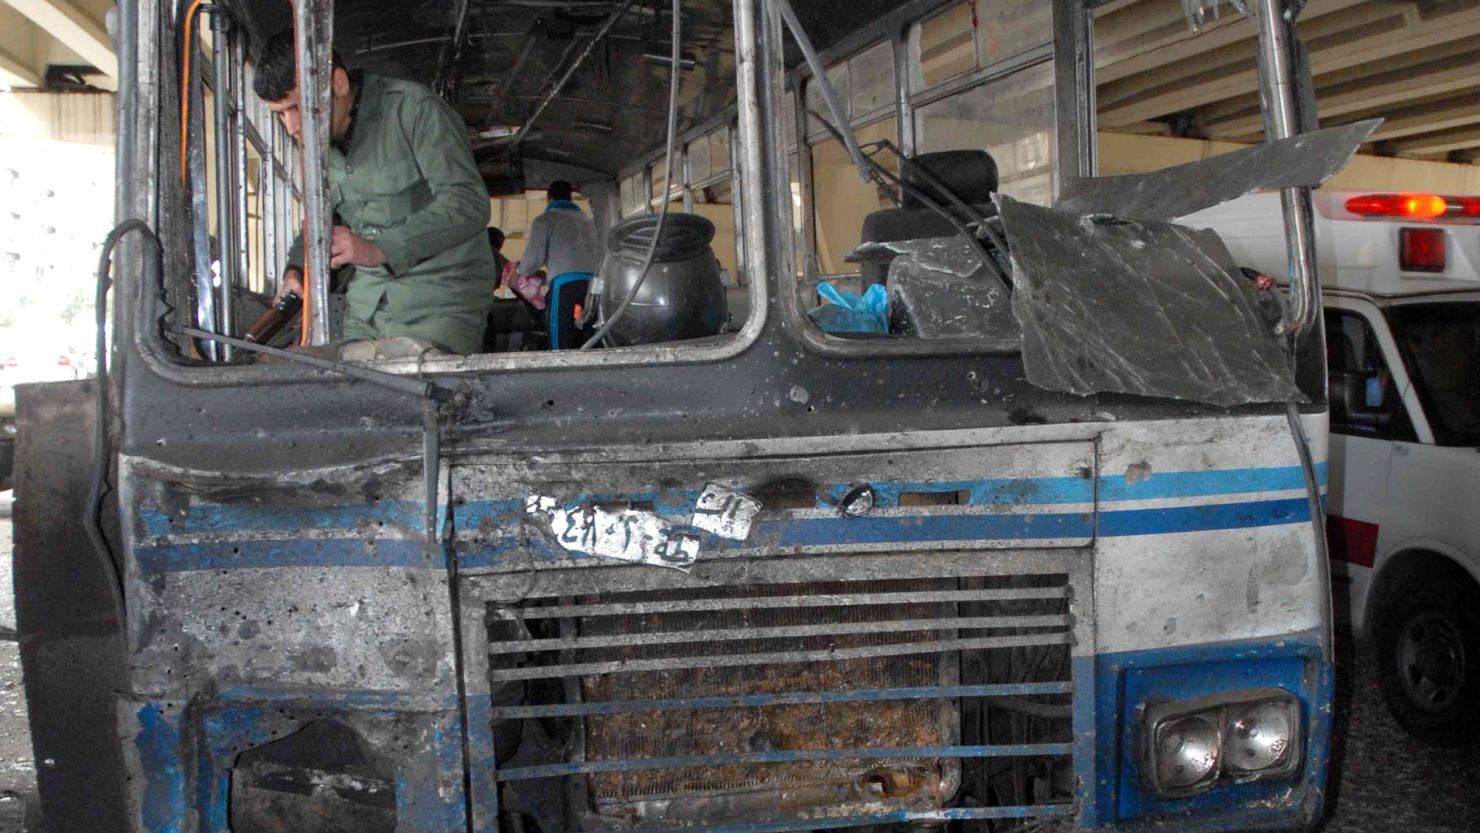 A photo released by the Syrian News Agency shows a damaged bus at the site of Friday's suicide bombing in Damascus.